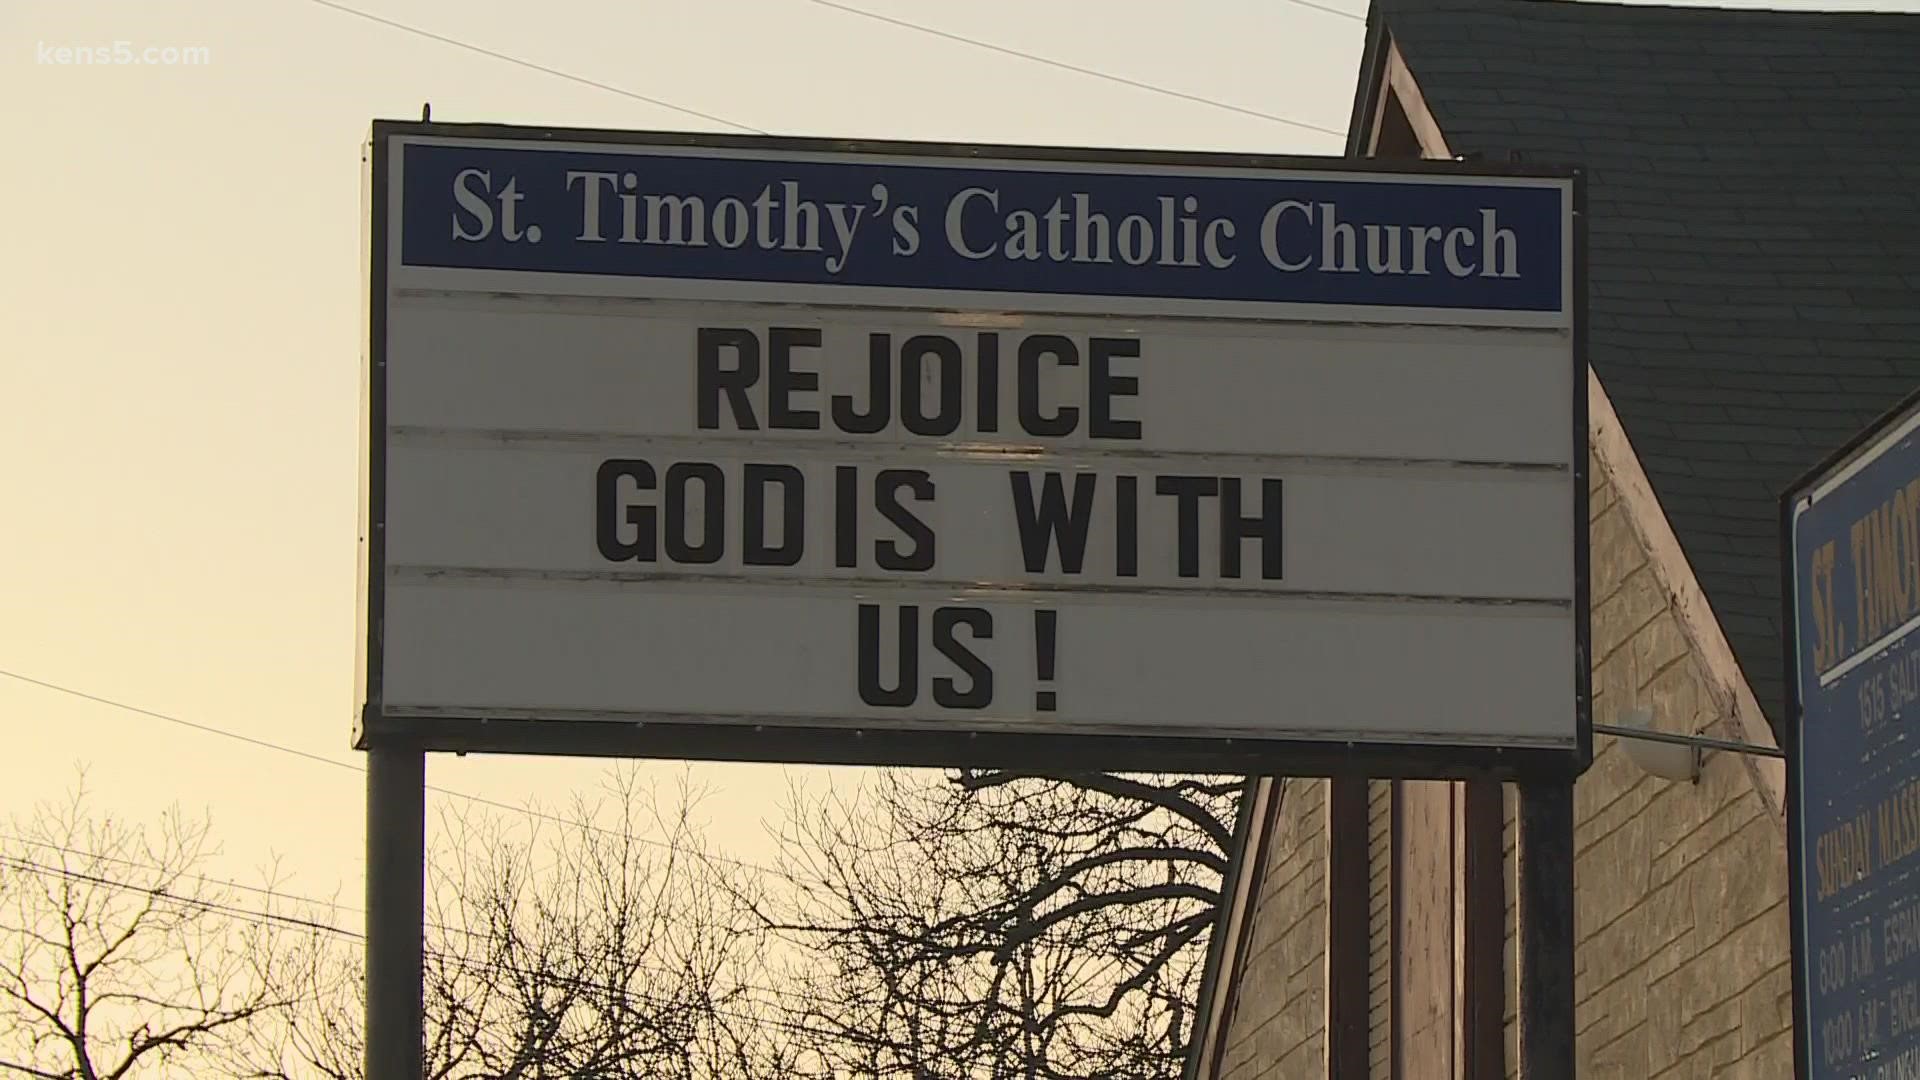 Witnesses said a man came into St. Timothy, made the sign of the cross and gestured that he had a gun, aiming a weapon at the church. No one was hurt.